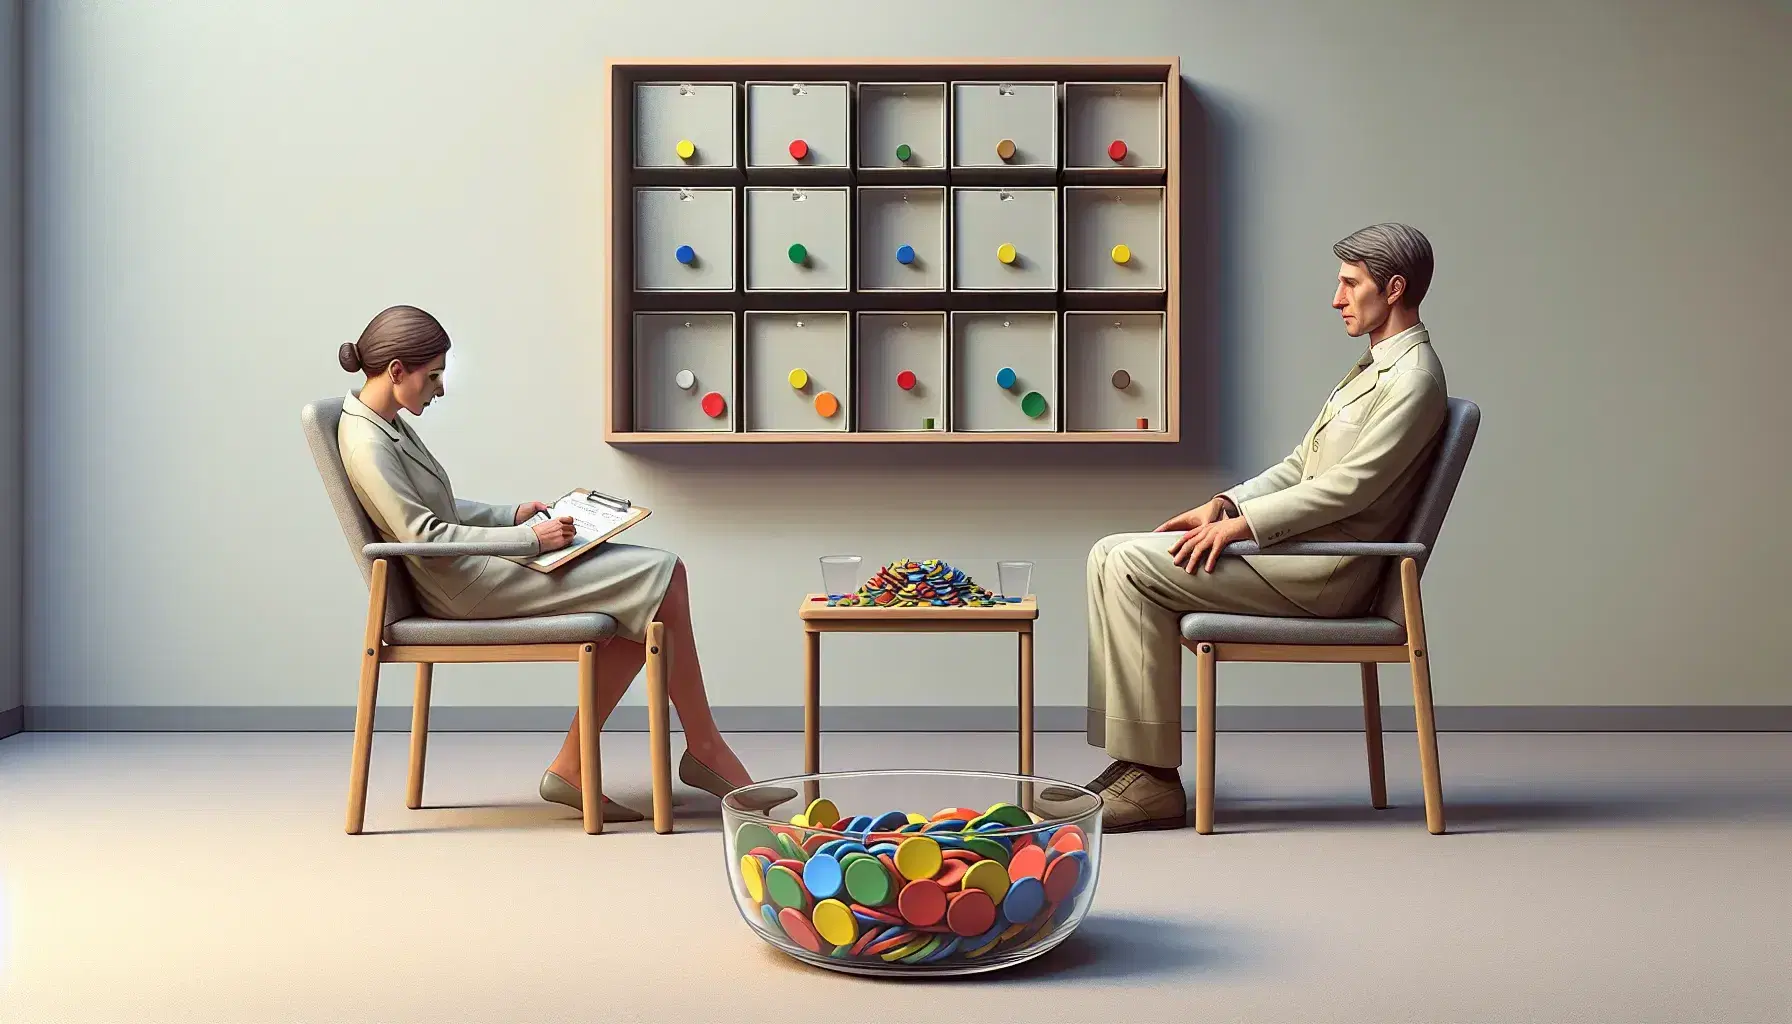 Therapist with notepad and patient taking a colored token from a bowl in a quiet room with shelf and colored boxes.